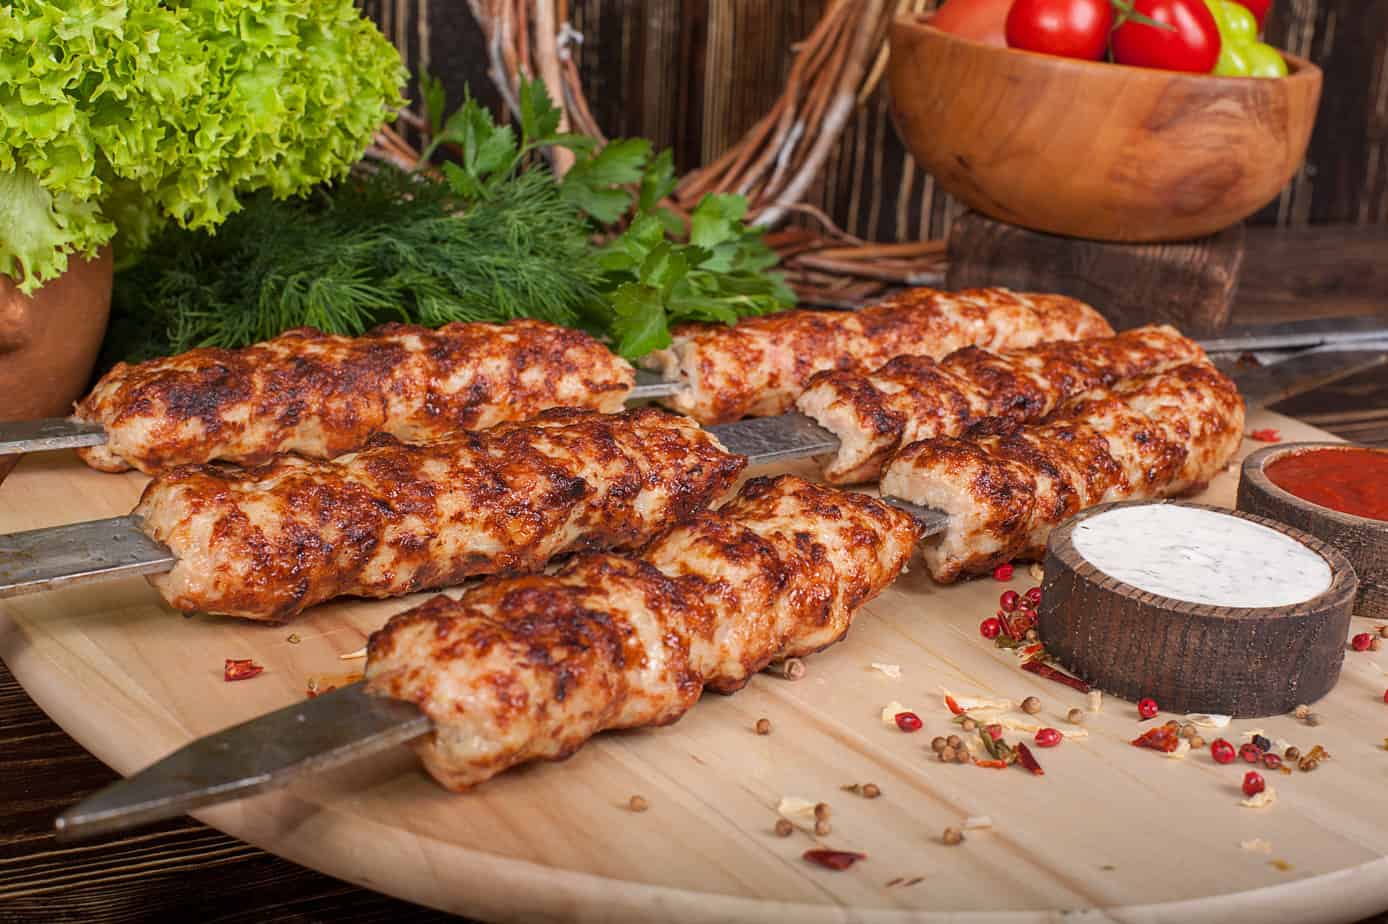 Grilled chicken kebabs on skewers with fresh herbs and sauces on a wooden board.